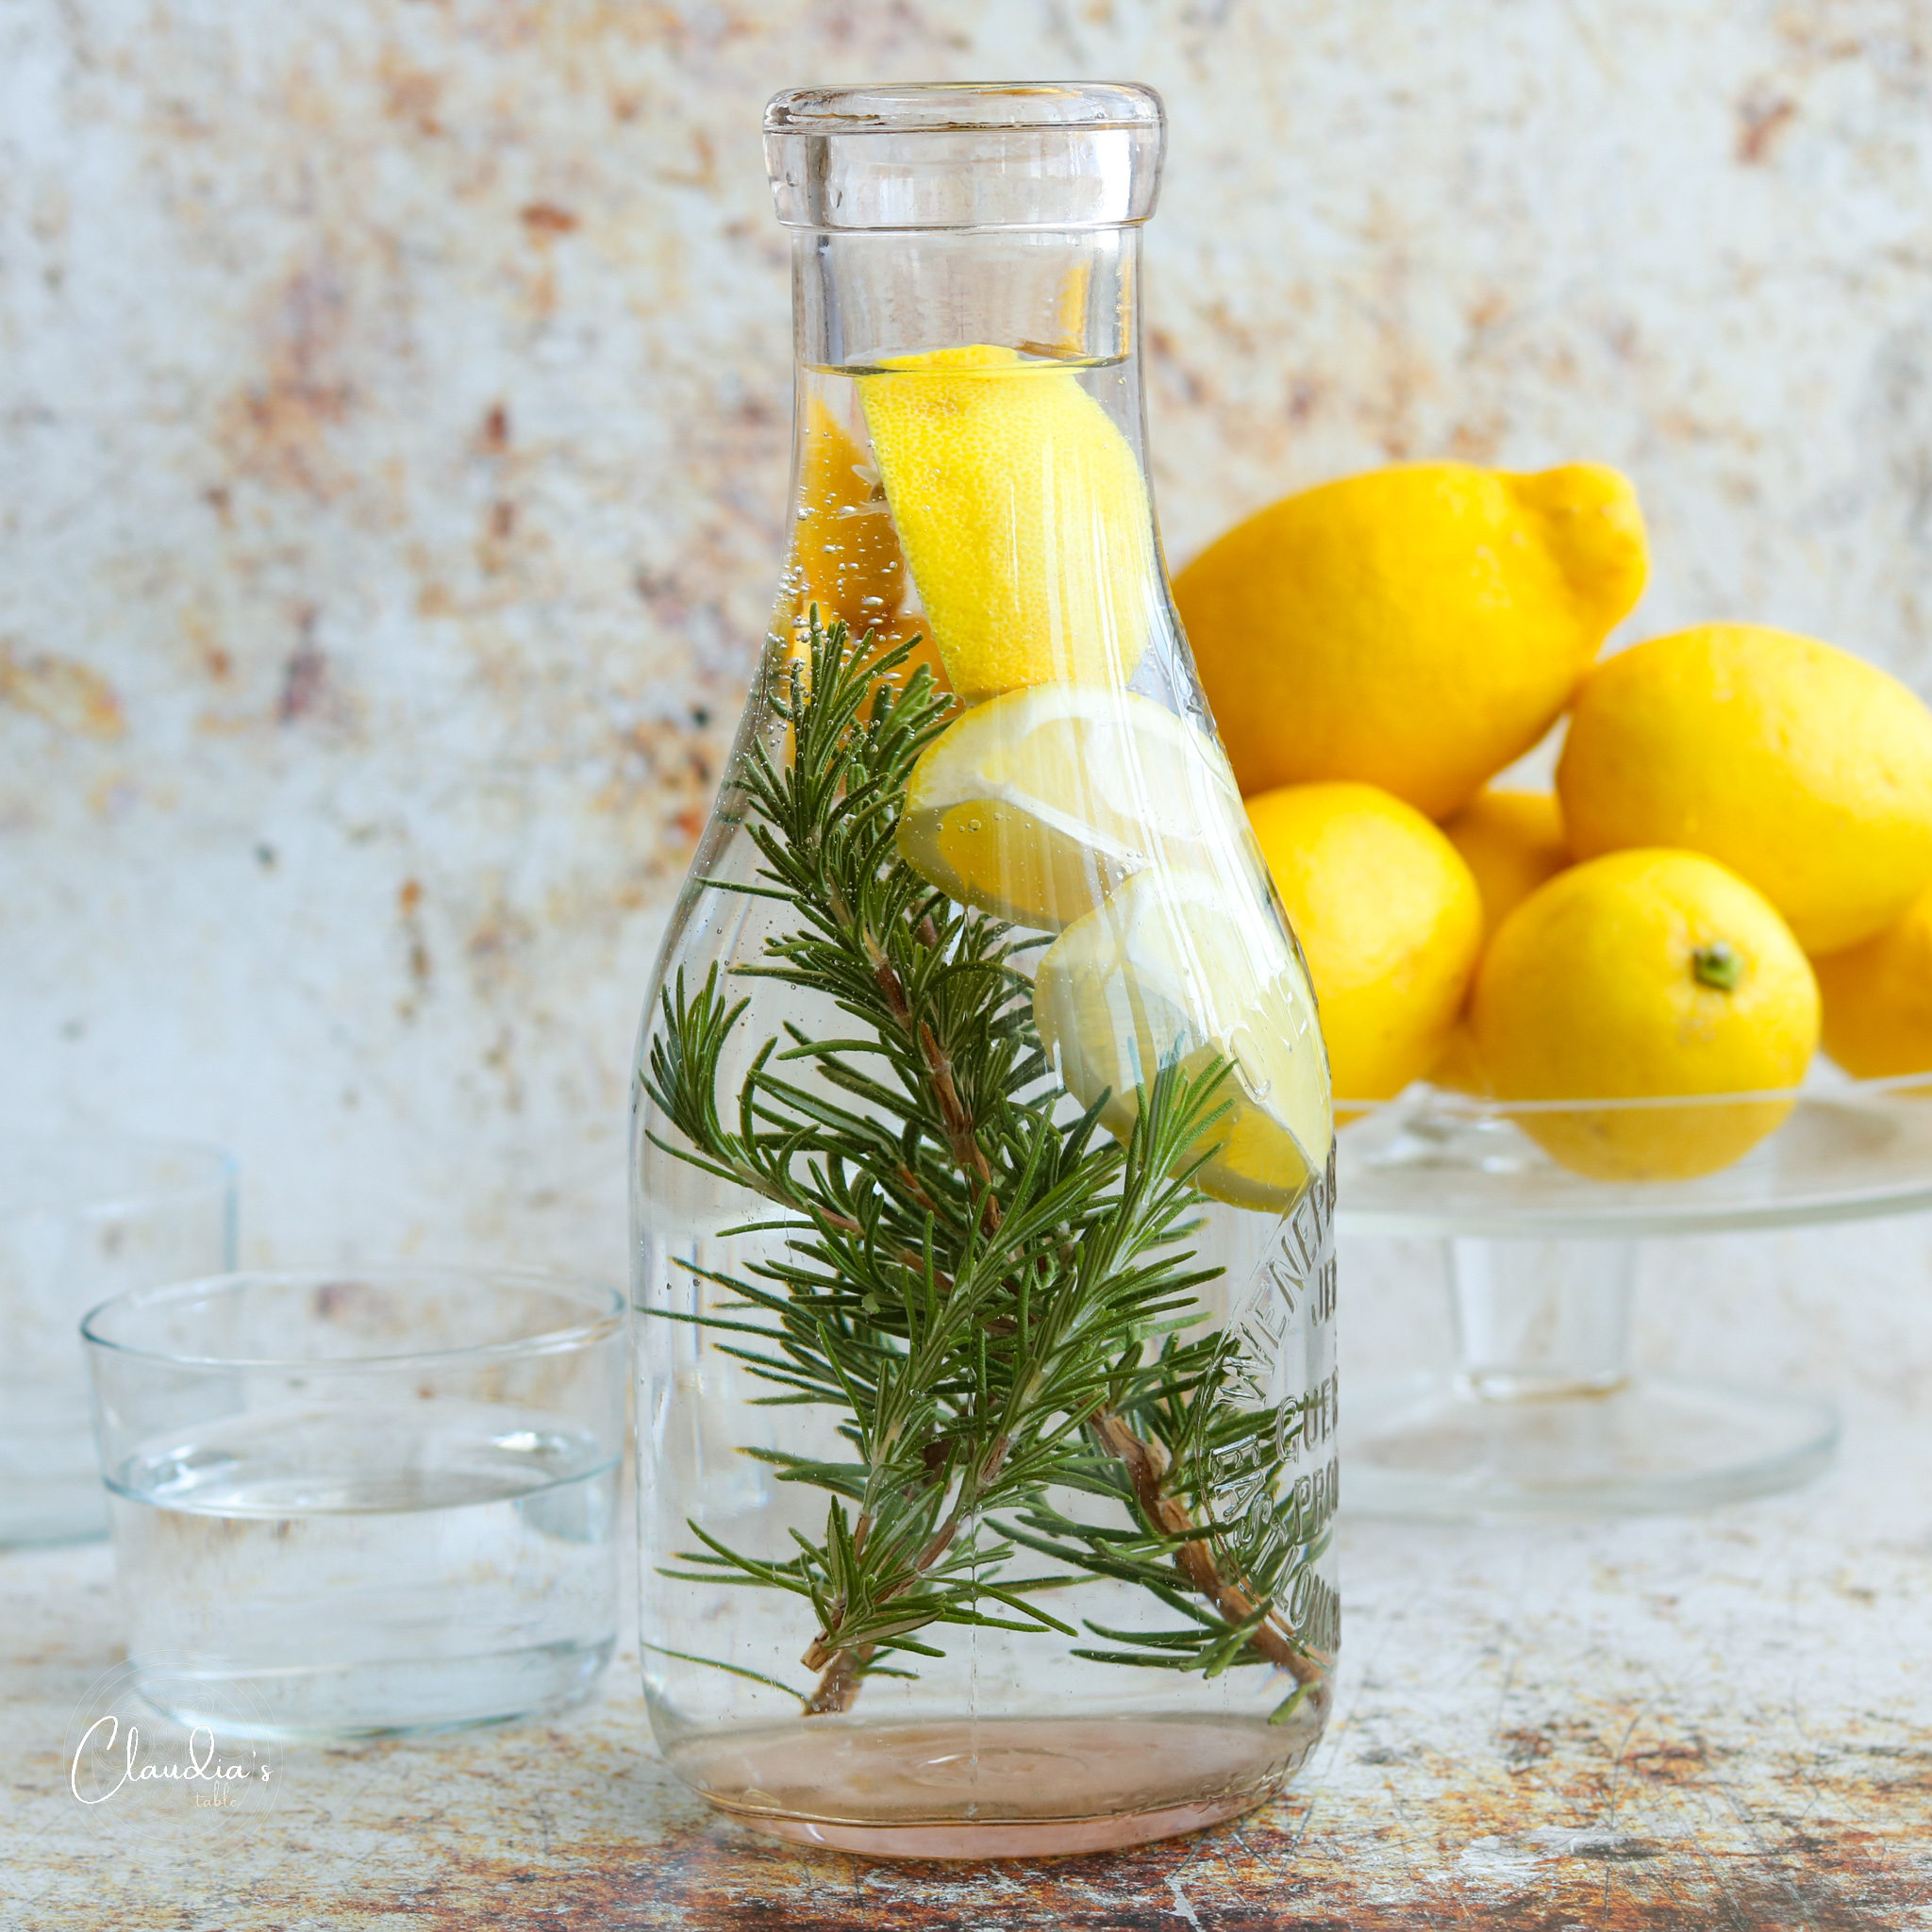 Rosemary And Citrus Cordial Recipe, Drinks Recipes